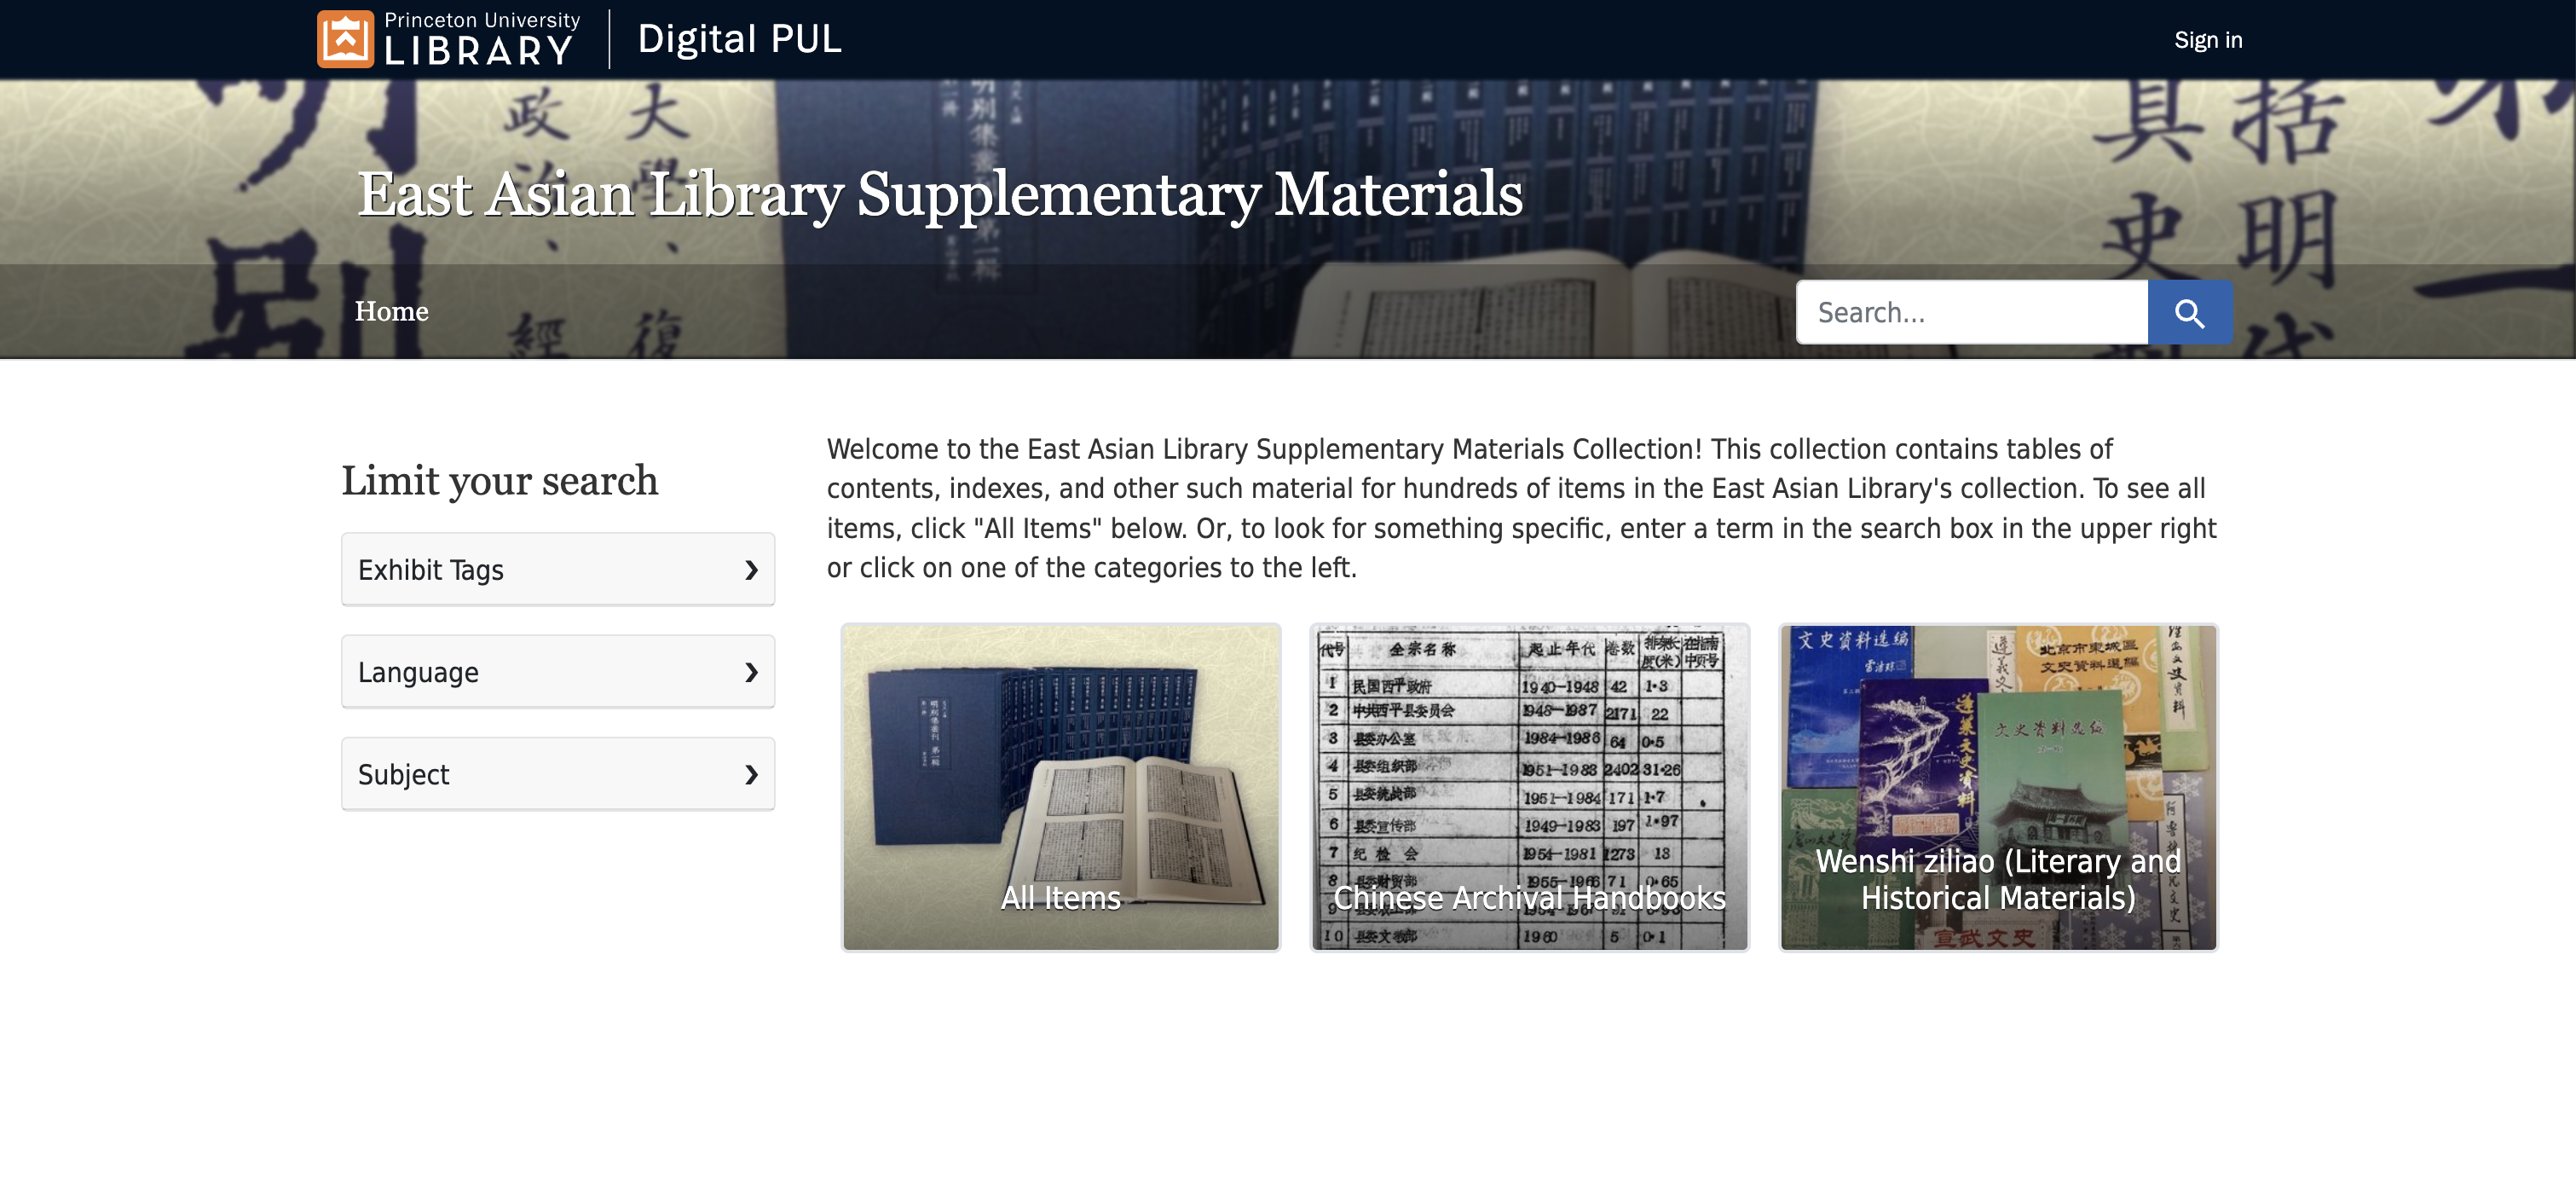 This is the image of the front page of Princeton's East Asian Library Supplementary Materials.